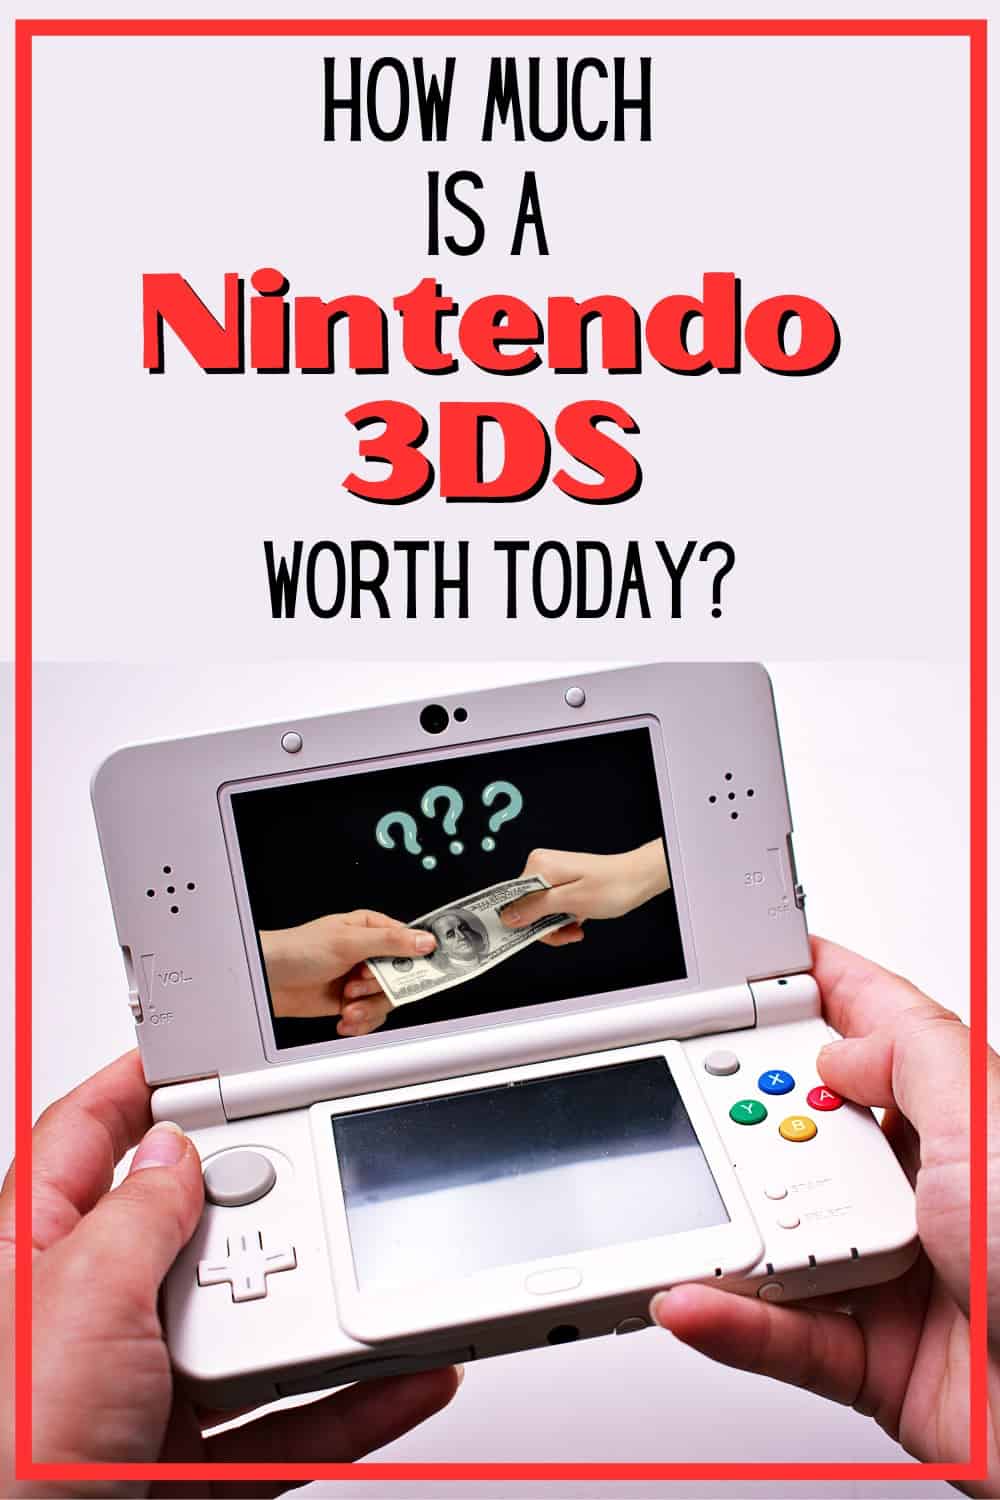 How Much Is A Nintendo 3DS Worth In Today’s Market? 8Bit Pickle